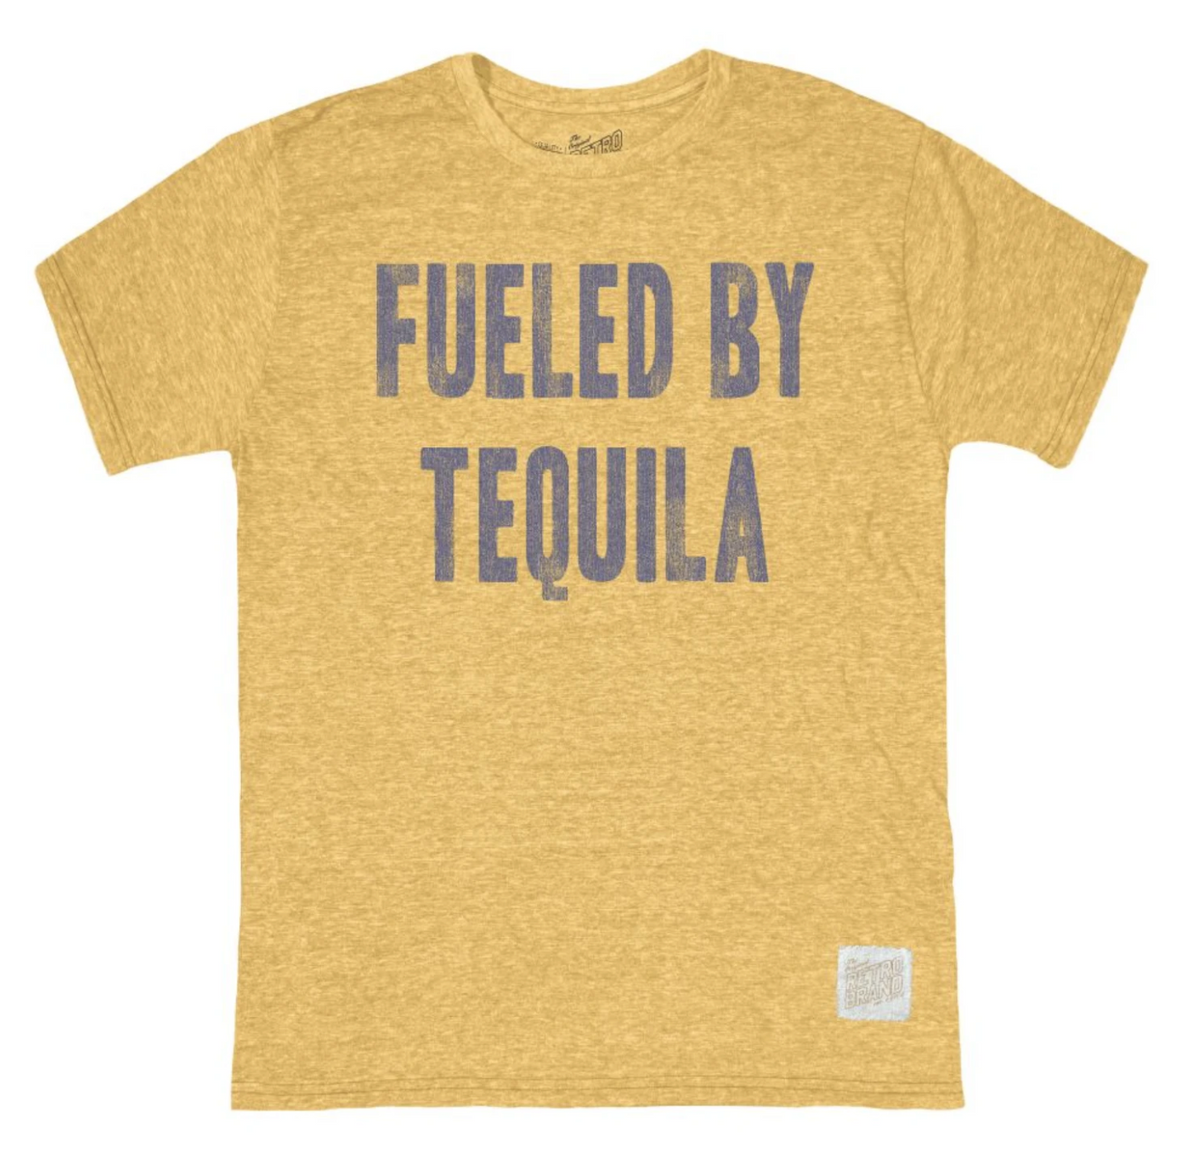 Fueled by Tequila Tri-Blend Tee